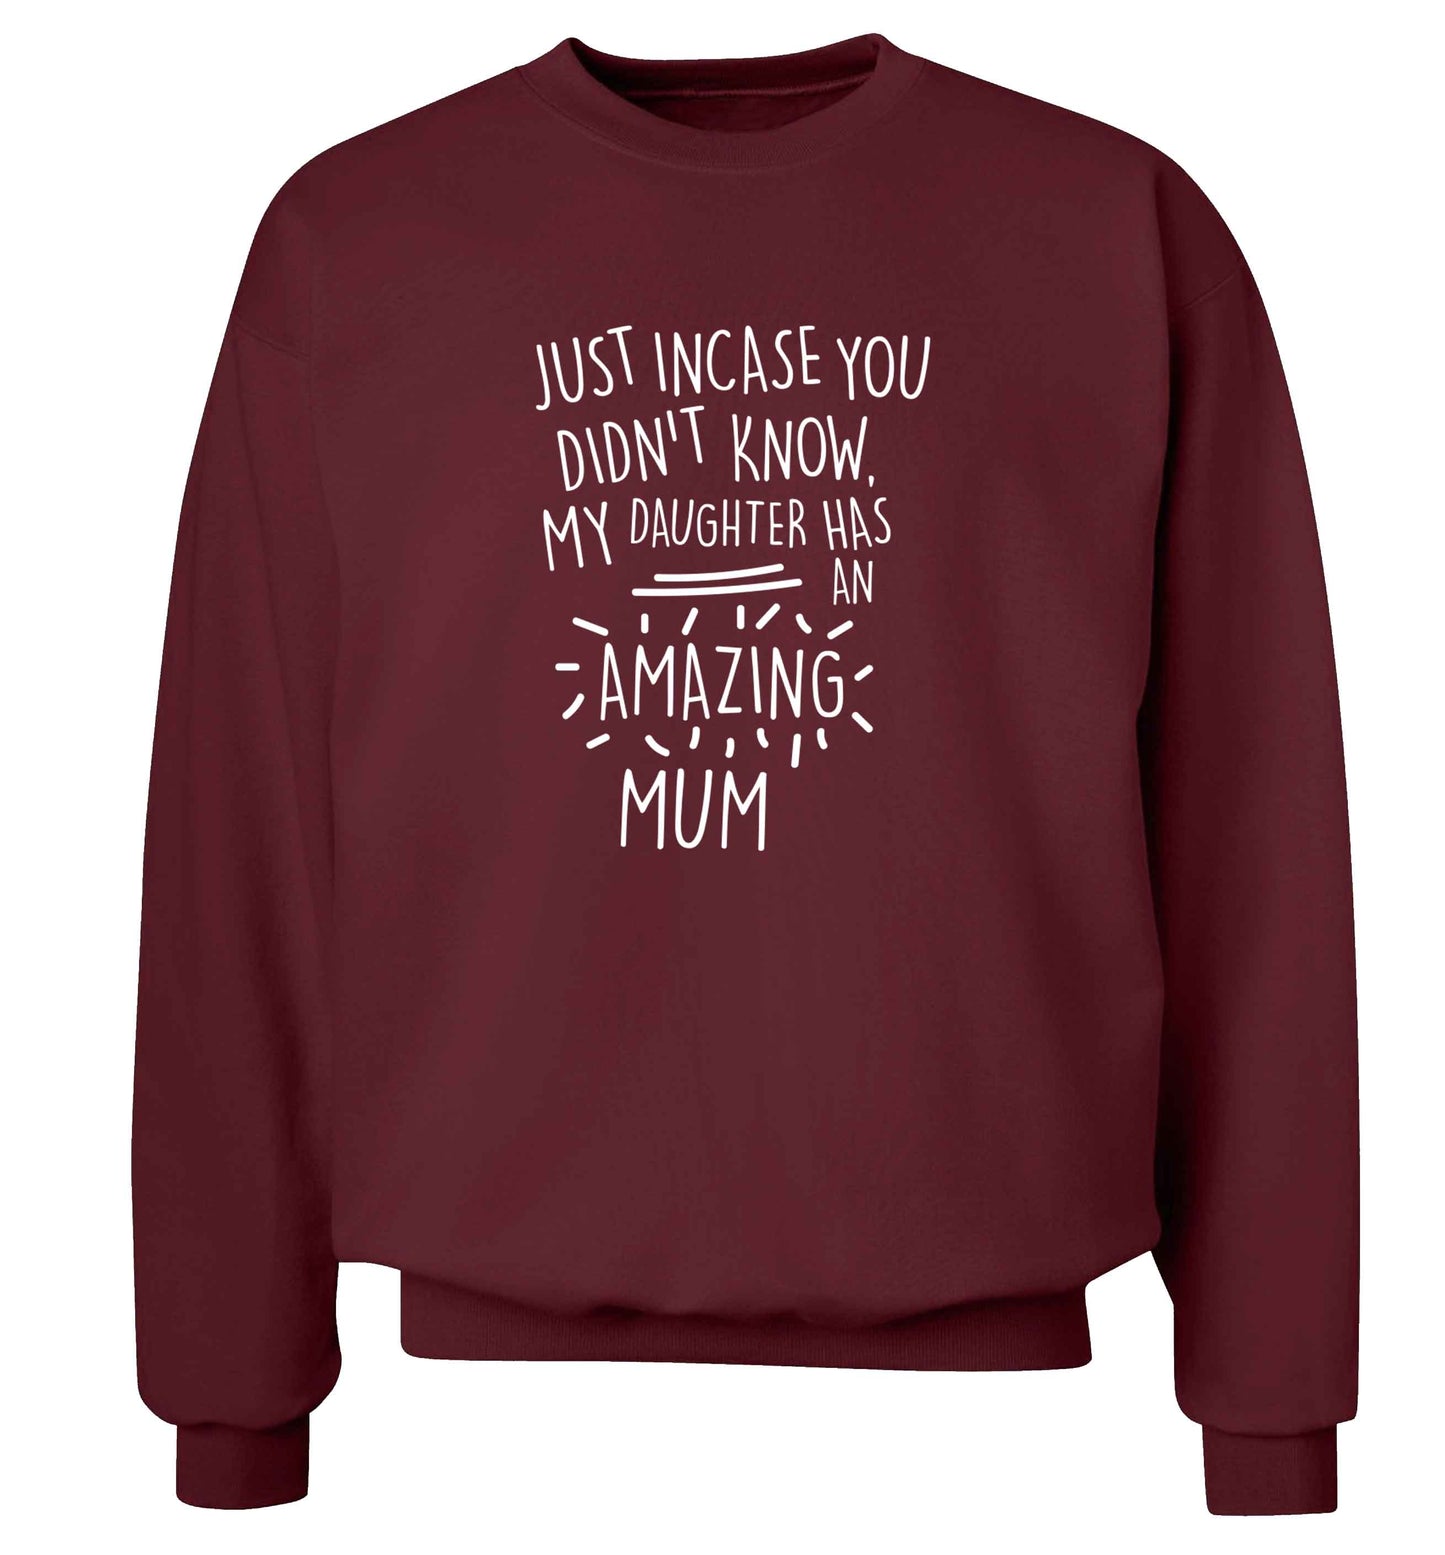 Just incase you didn't know my daughter has an amazing mum adult's unisex maroon sweater 2XL